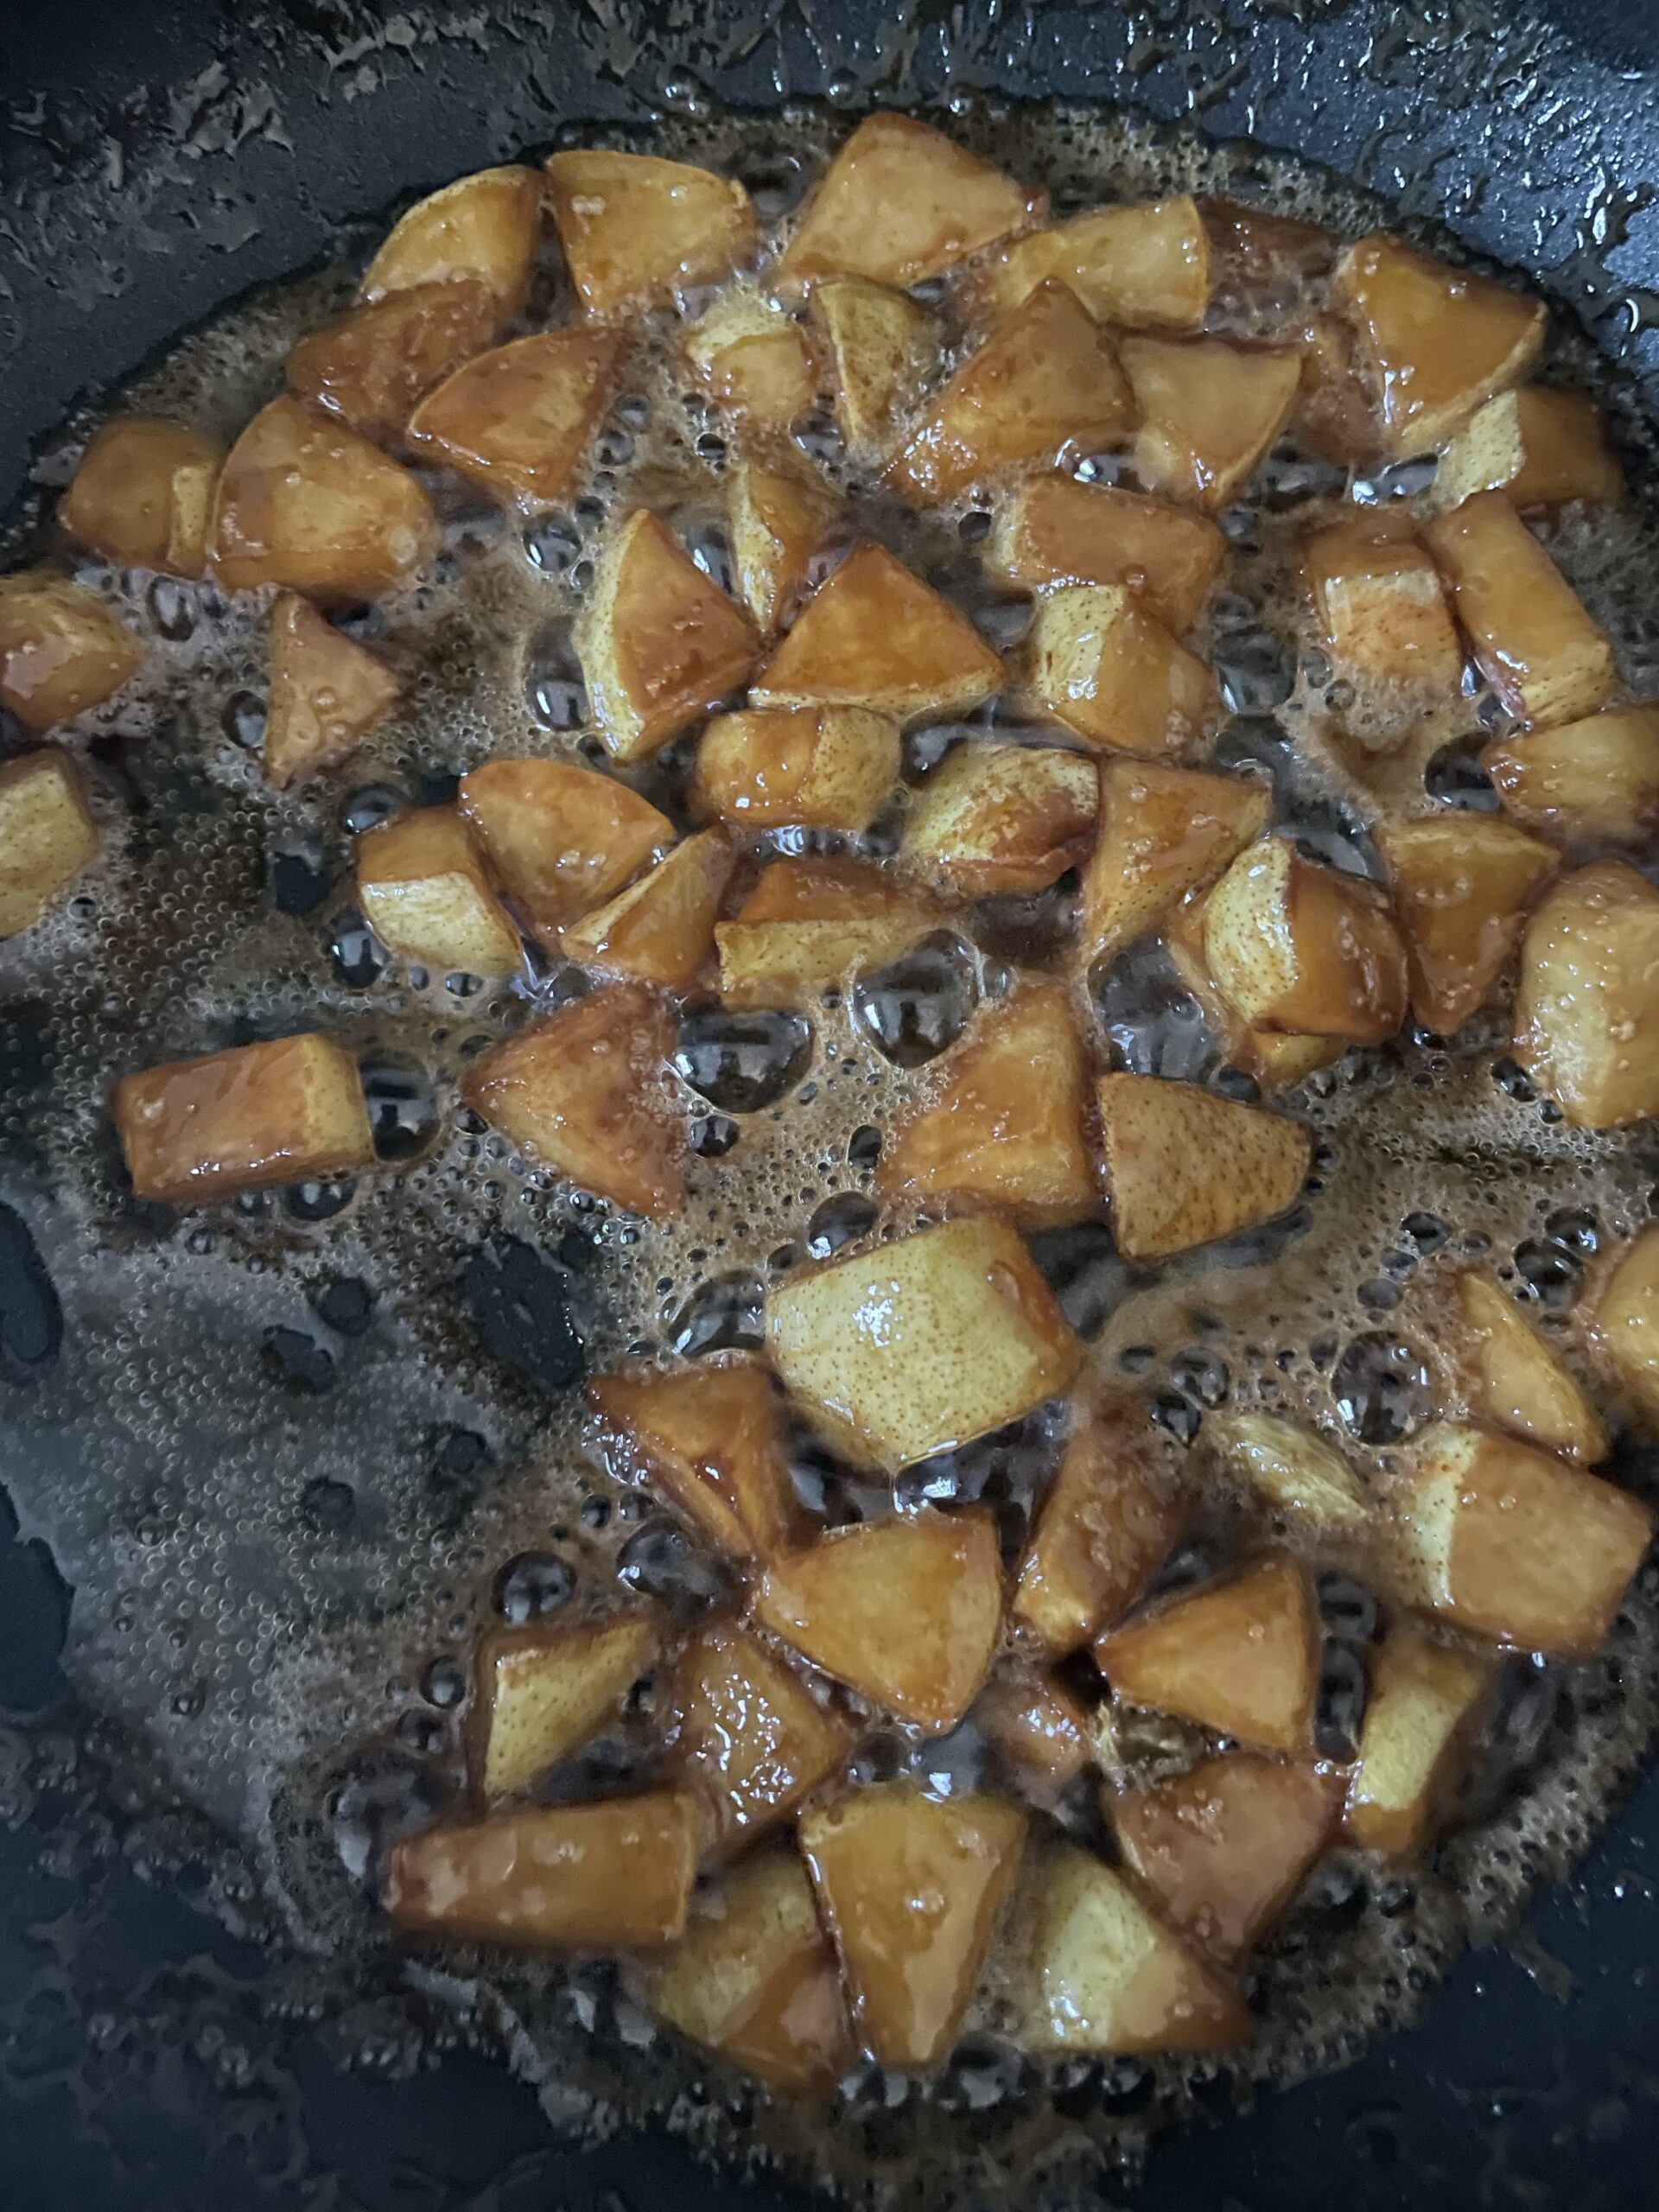 Chunks of pear caramelizing in a frying pan